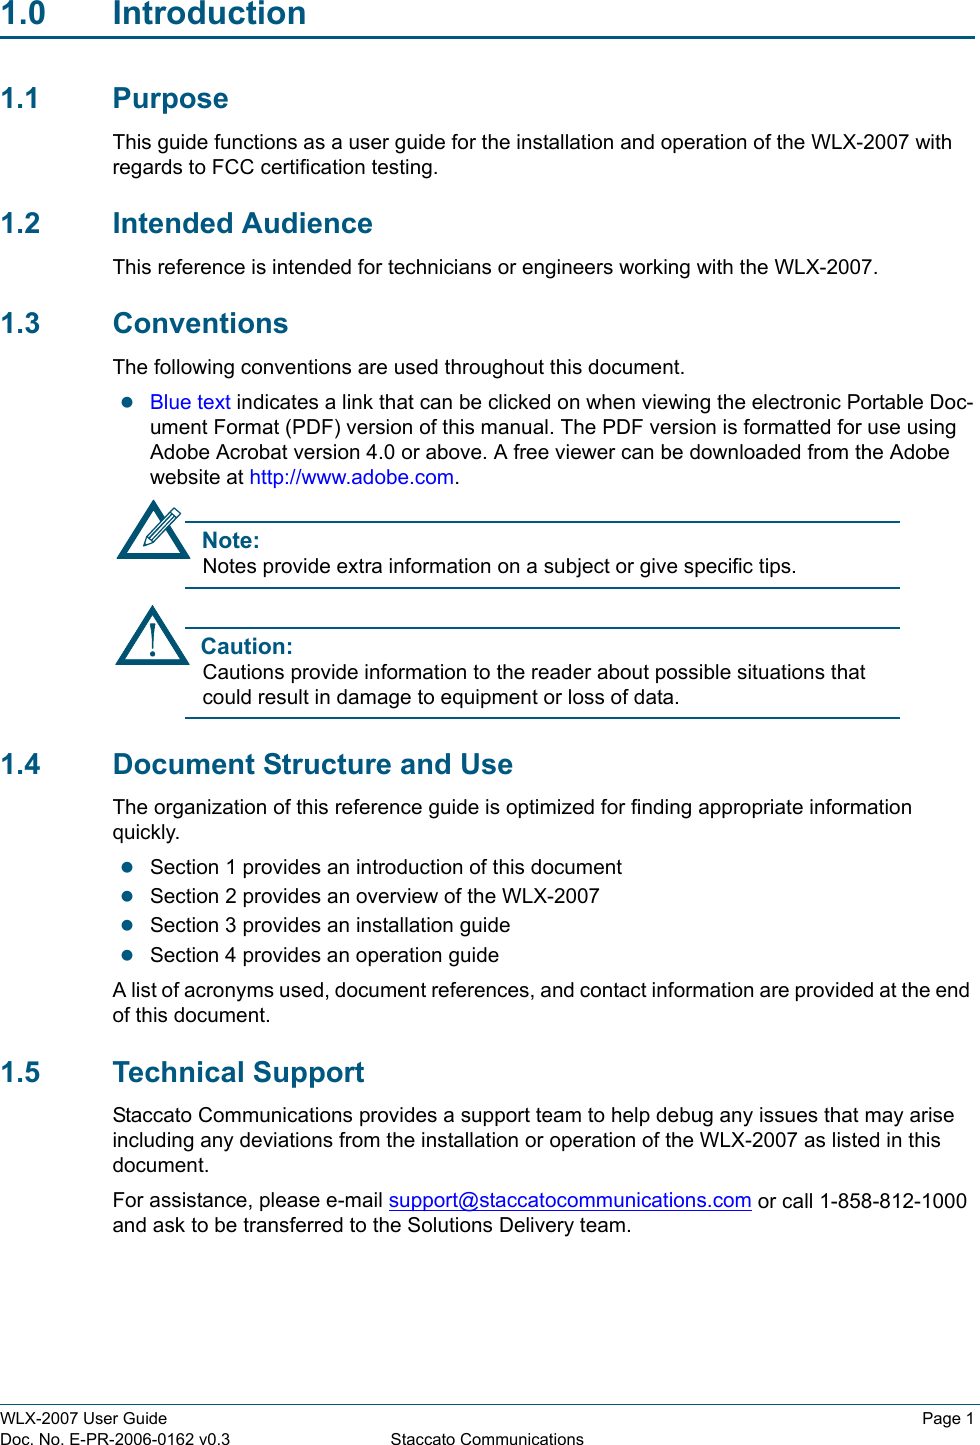 WLX-2007 User Guide Page 1Doc. No. E-PR-2006-0162 v0.3 Staccato Communications1.0 Introduction1.1 PurposeThis guide functions as a user guide for the installation and operation of the WLX-2007 with regards to FCC certification testing. 1.2 Intended AudienceThis reference is intended for technicians or engineers working with the WLX-2007. 1.3 ConventionsThe following conventions are used throughout this document.zBlue text indicates a link that can be clicked on when viewing the electronic Portable Doc-ument Format (PDF) version of this manual. The PDF version is formatted for use using Adobe Acrobat version 4.0 or above. A free viewer can be downloaded from the Adobe website at http://www.adobe.com. Note:Notes provide extra information on a subject or give specific tips.Caution:Cautions provide information to the reader about possible situations that could result in damage to equipment or loss of data.1.4 Document Structure and UseThe organization of this reference guide is optimized for finding appropriate information quickly. zSection 1 provides an introduction of this documentzSection 2 provides an overview of the WLX-2007zSection 3 provides an installation guidezSection 4 provides an operation guideA list of acronyms used, document references, and contact information are provided at the end of this document.1.5 Technical SupportStaccato Communications provides a support team to help debug any issues that may arise including any deviations from the installation or operation of the WLX-2007 as listed in this document. For assistance, please e-mail support@staccatocommunications.com or call 1-858-812-1000 and ask to be transferred to the Solutions Delivery team.